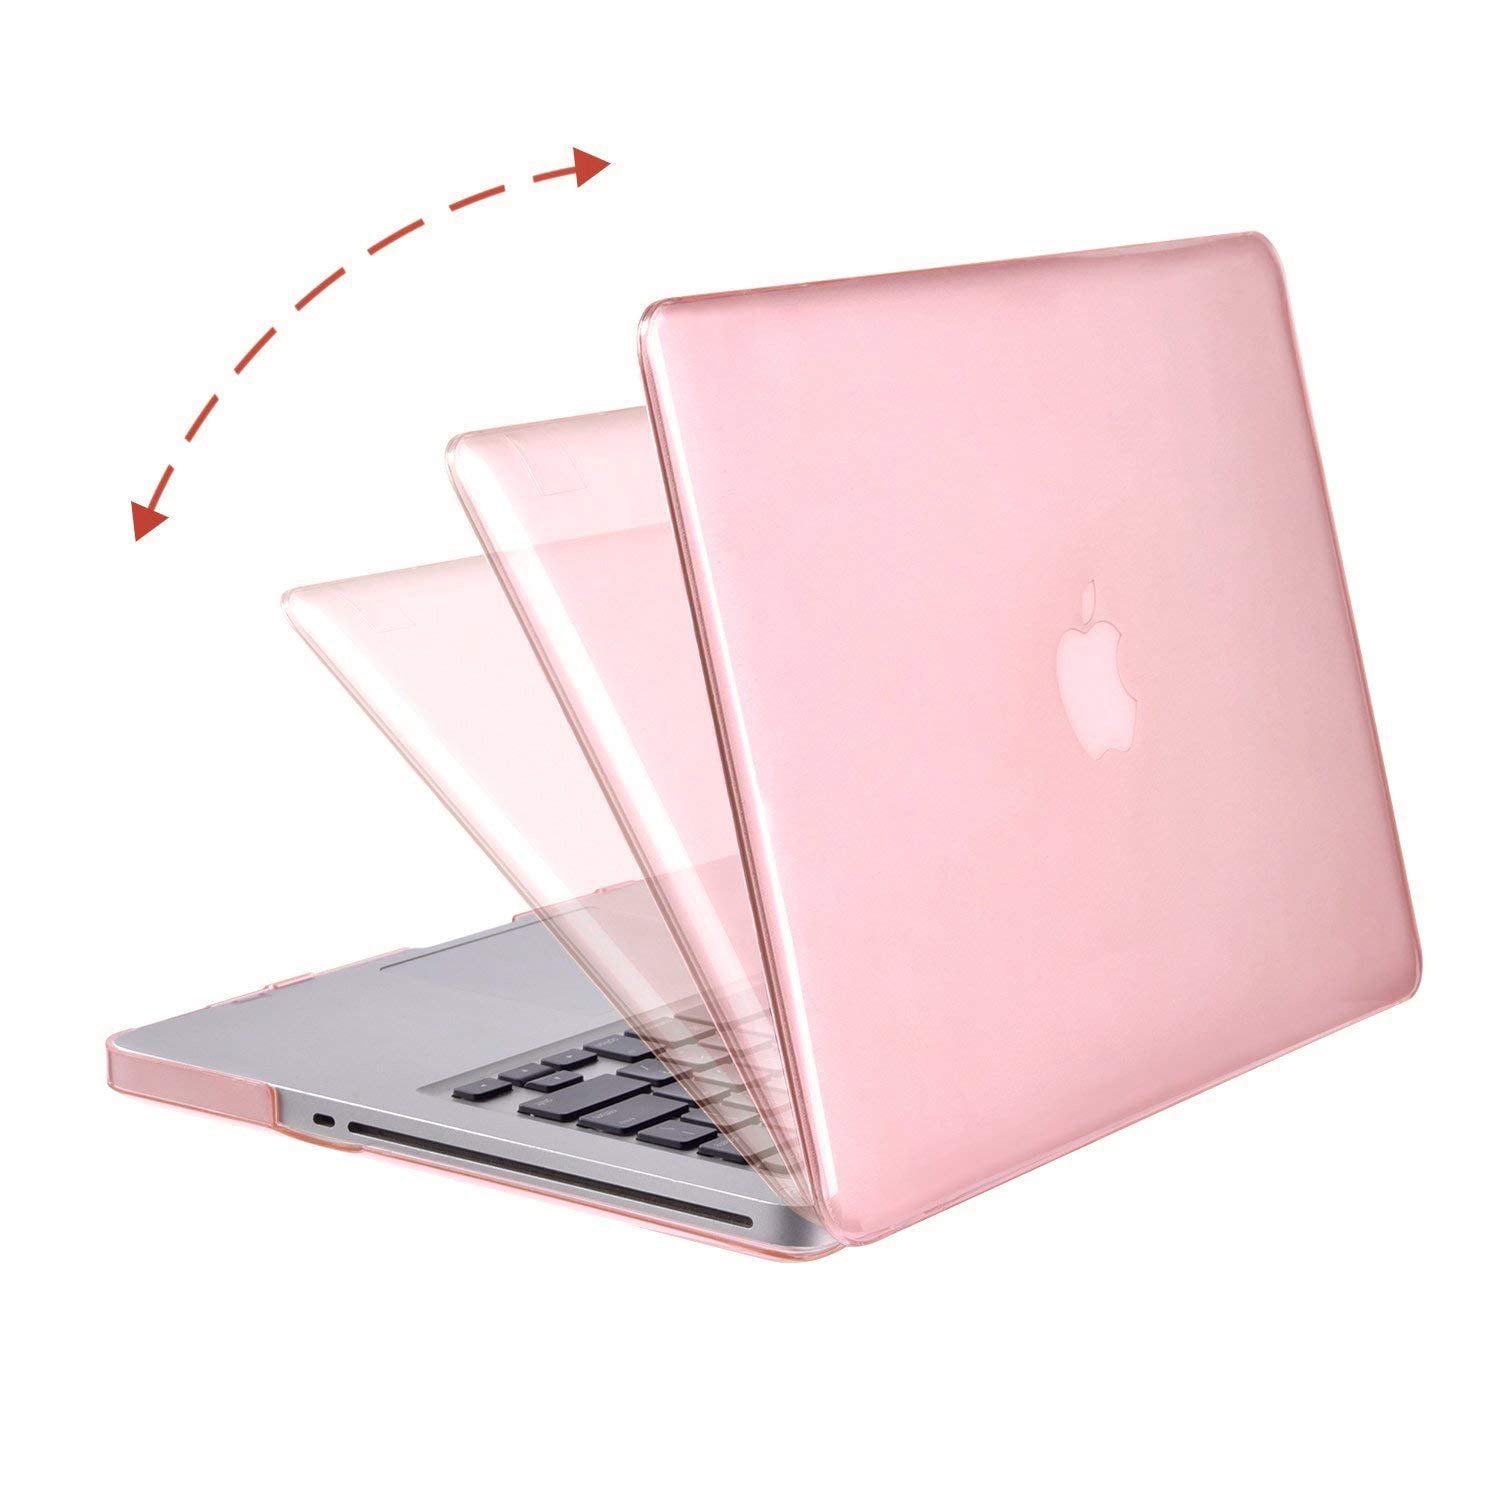 2 in 1 PINK Crystal Hard Case Cover for Macbook PRO13" A1278 with Keyboard Cover 